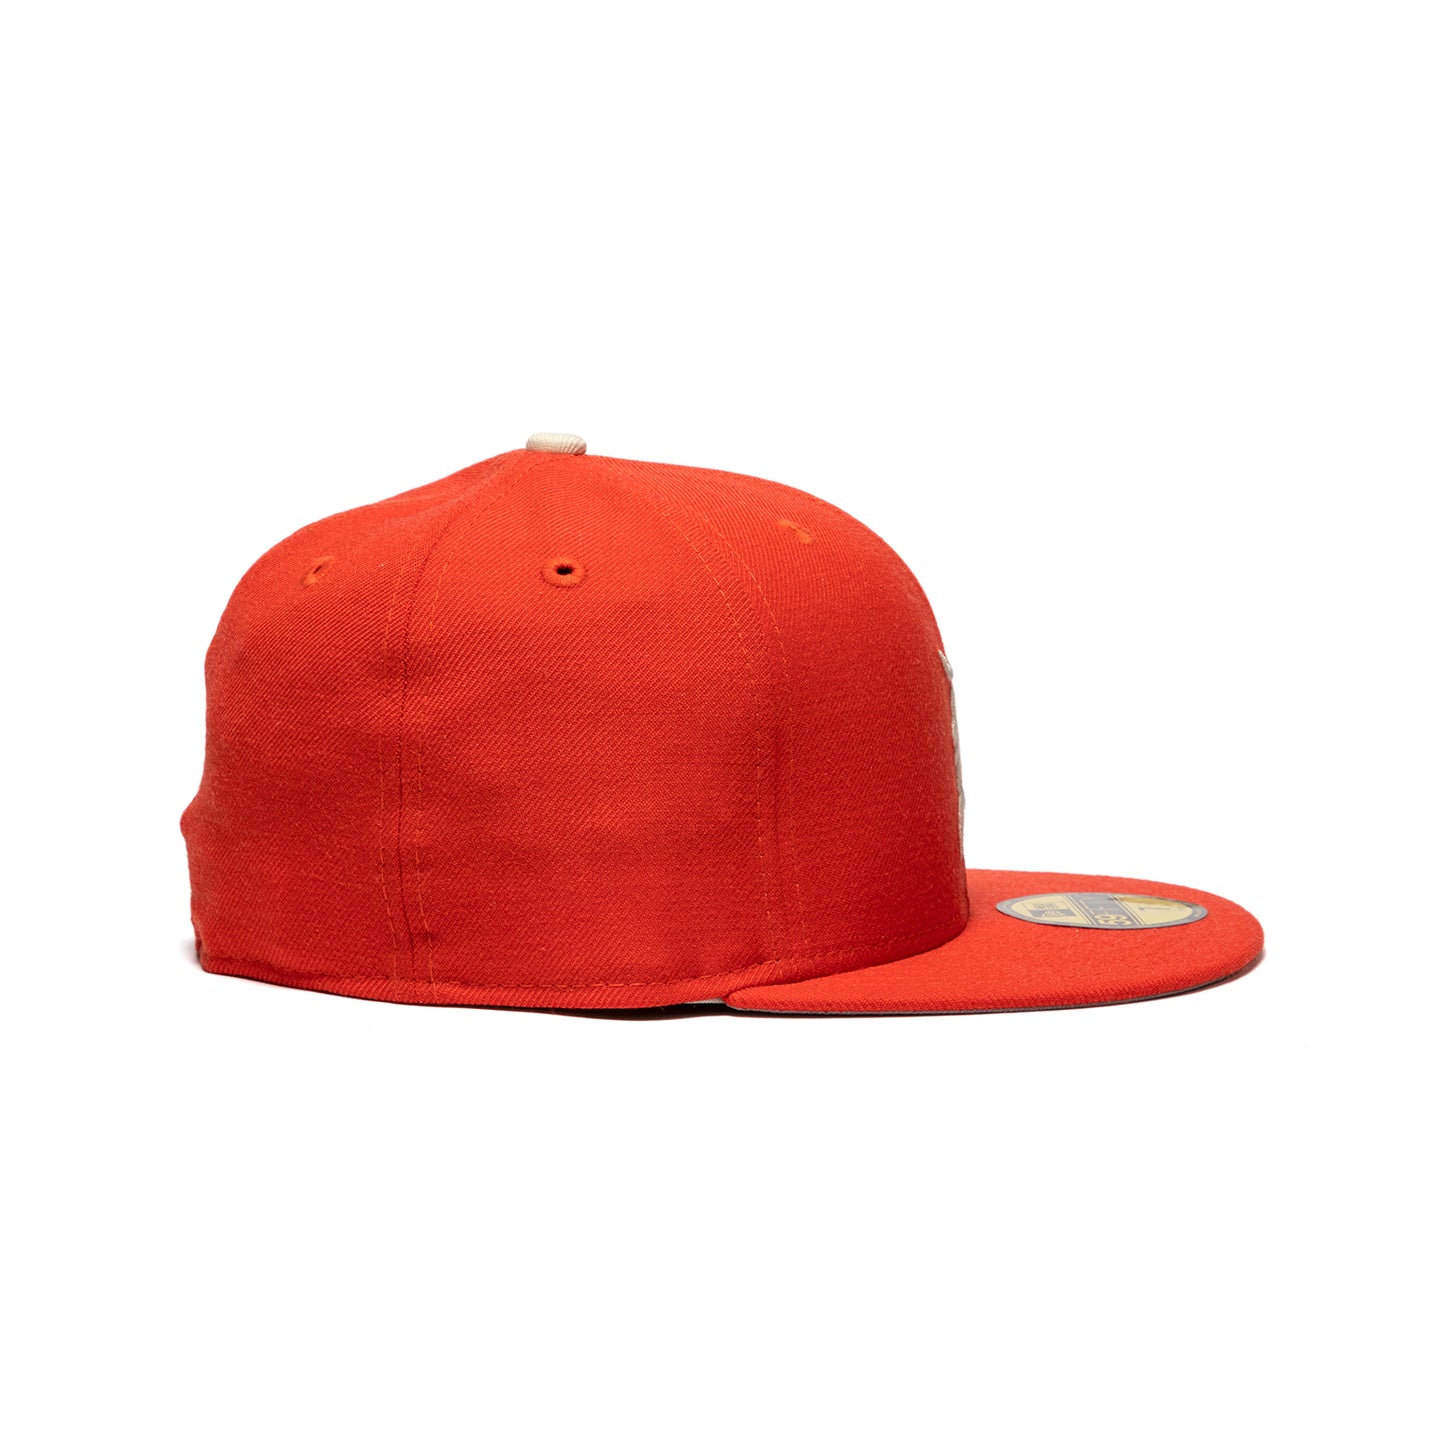 New Era x Fear of God 59FIFTY Essentials Fitted Cap (Orange/ Gray)